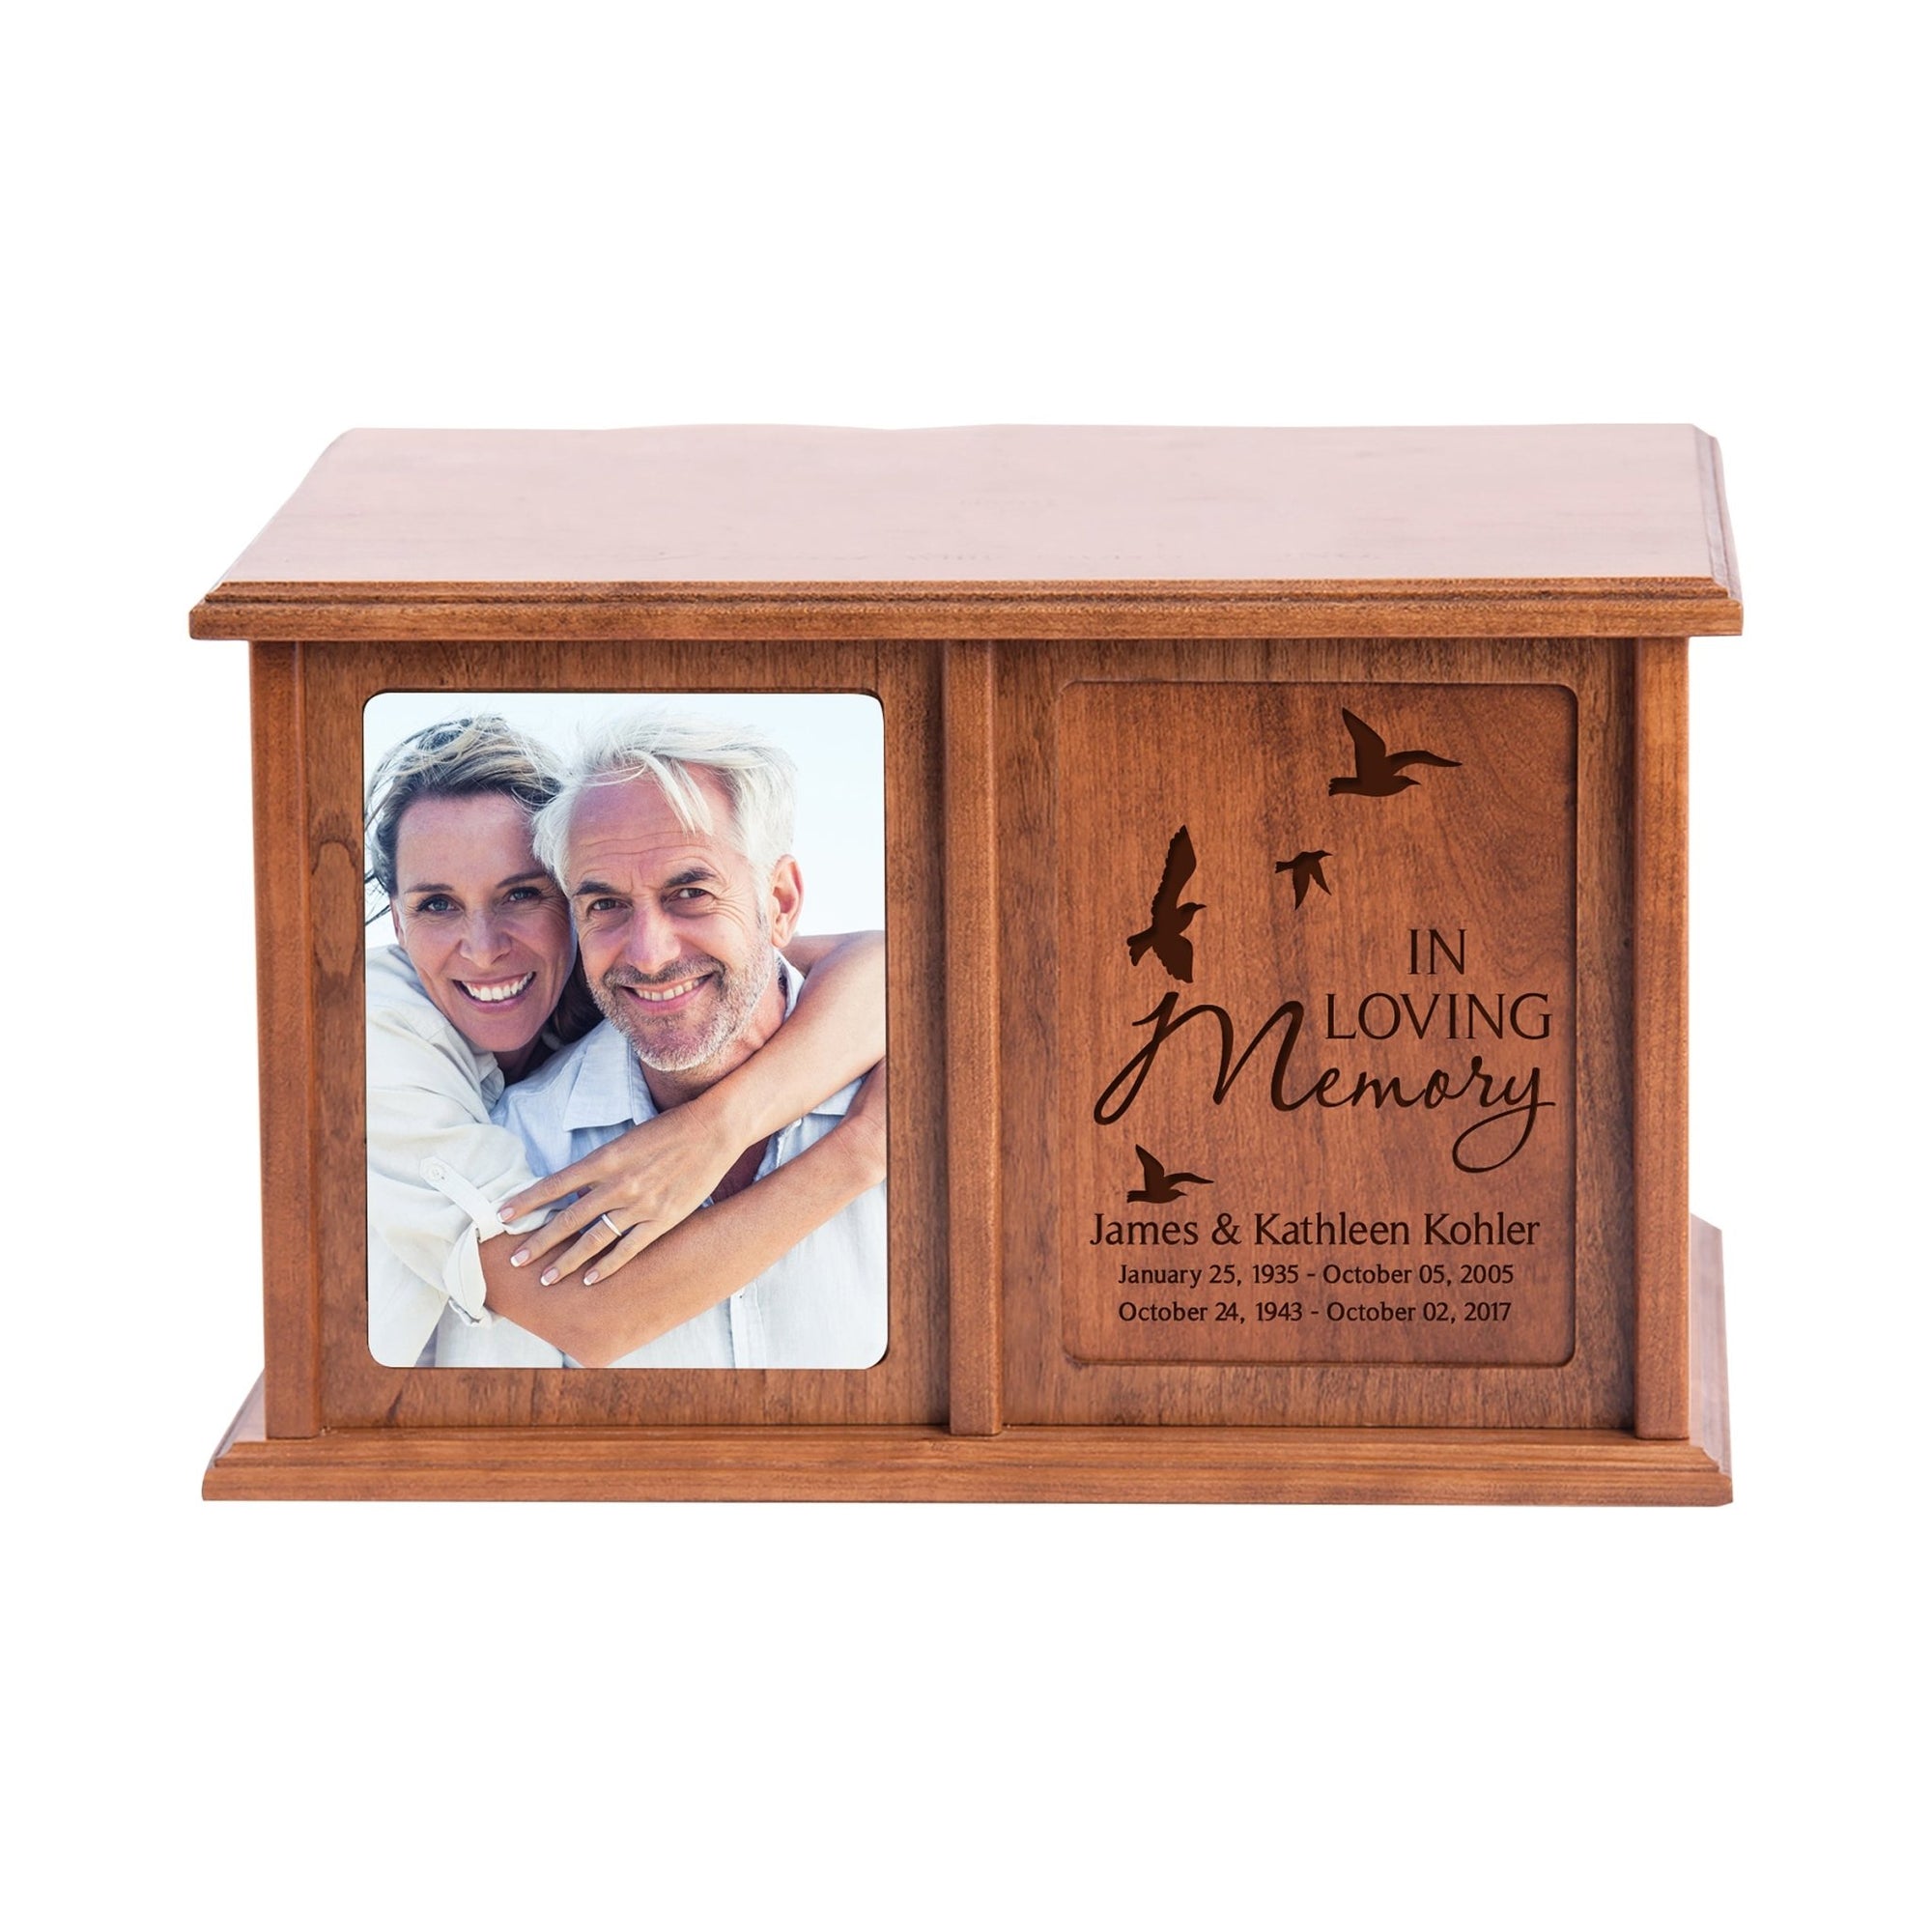 Personalized Extra Large Companion Urn Wooden Cremation Urn Box - In Loving Memory (Birds) - LifeSong Milestones